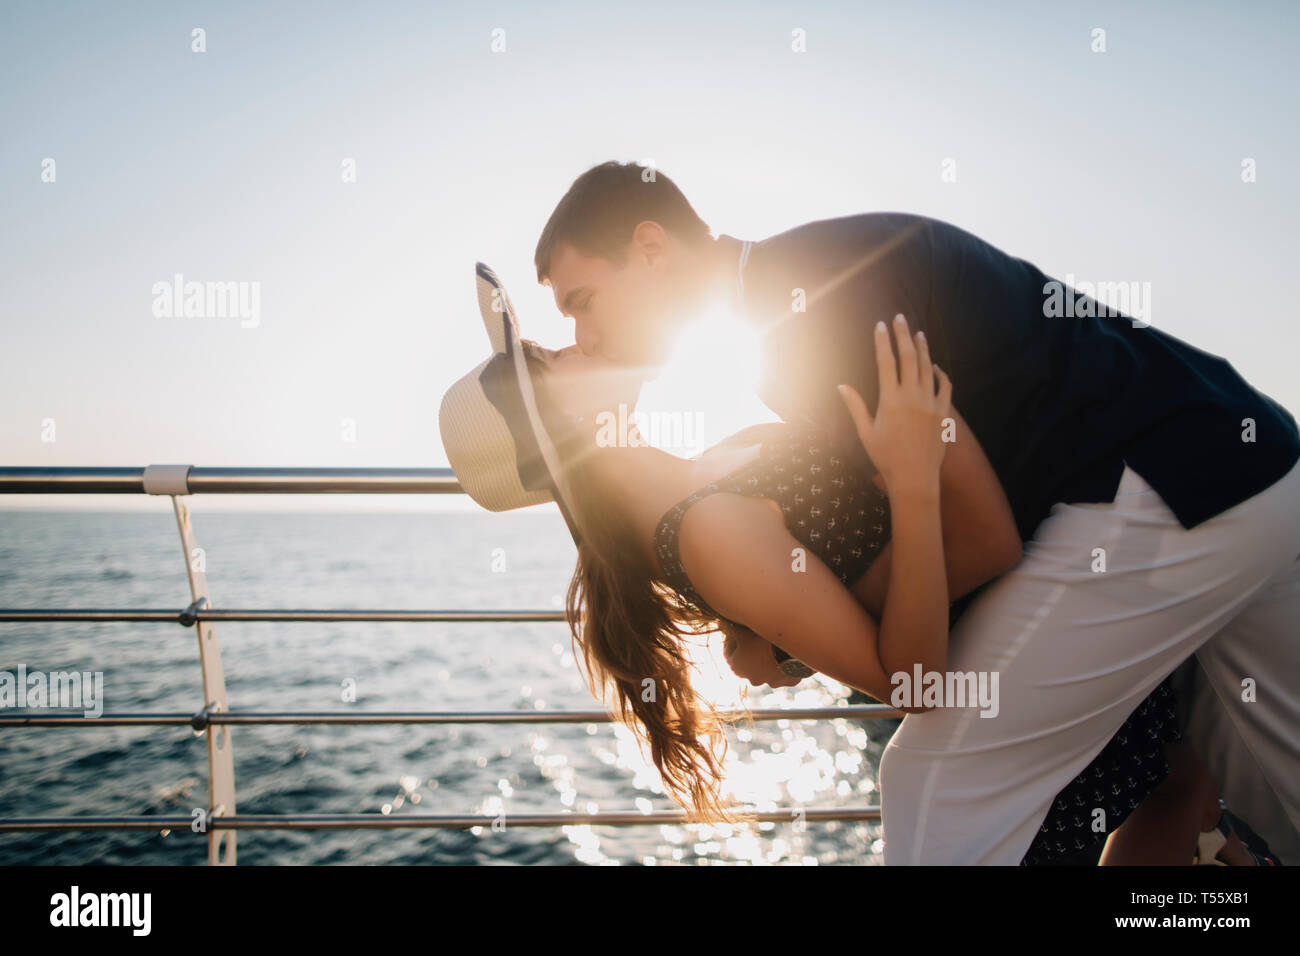 Man dipping and kissing woman on pier Stock Photo